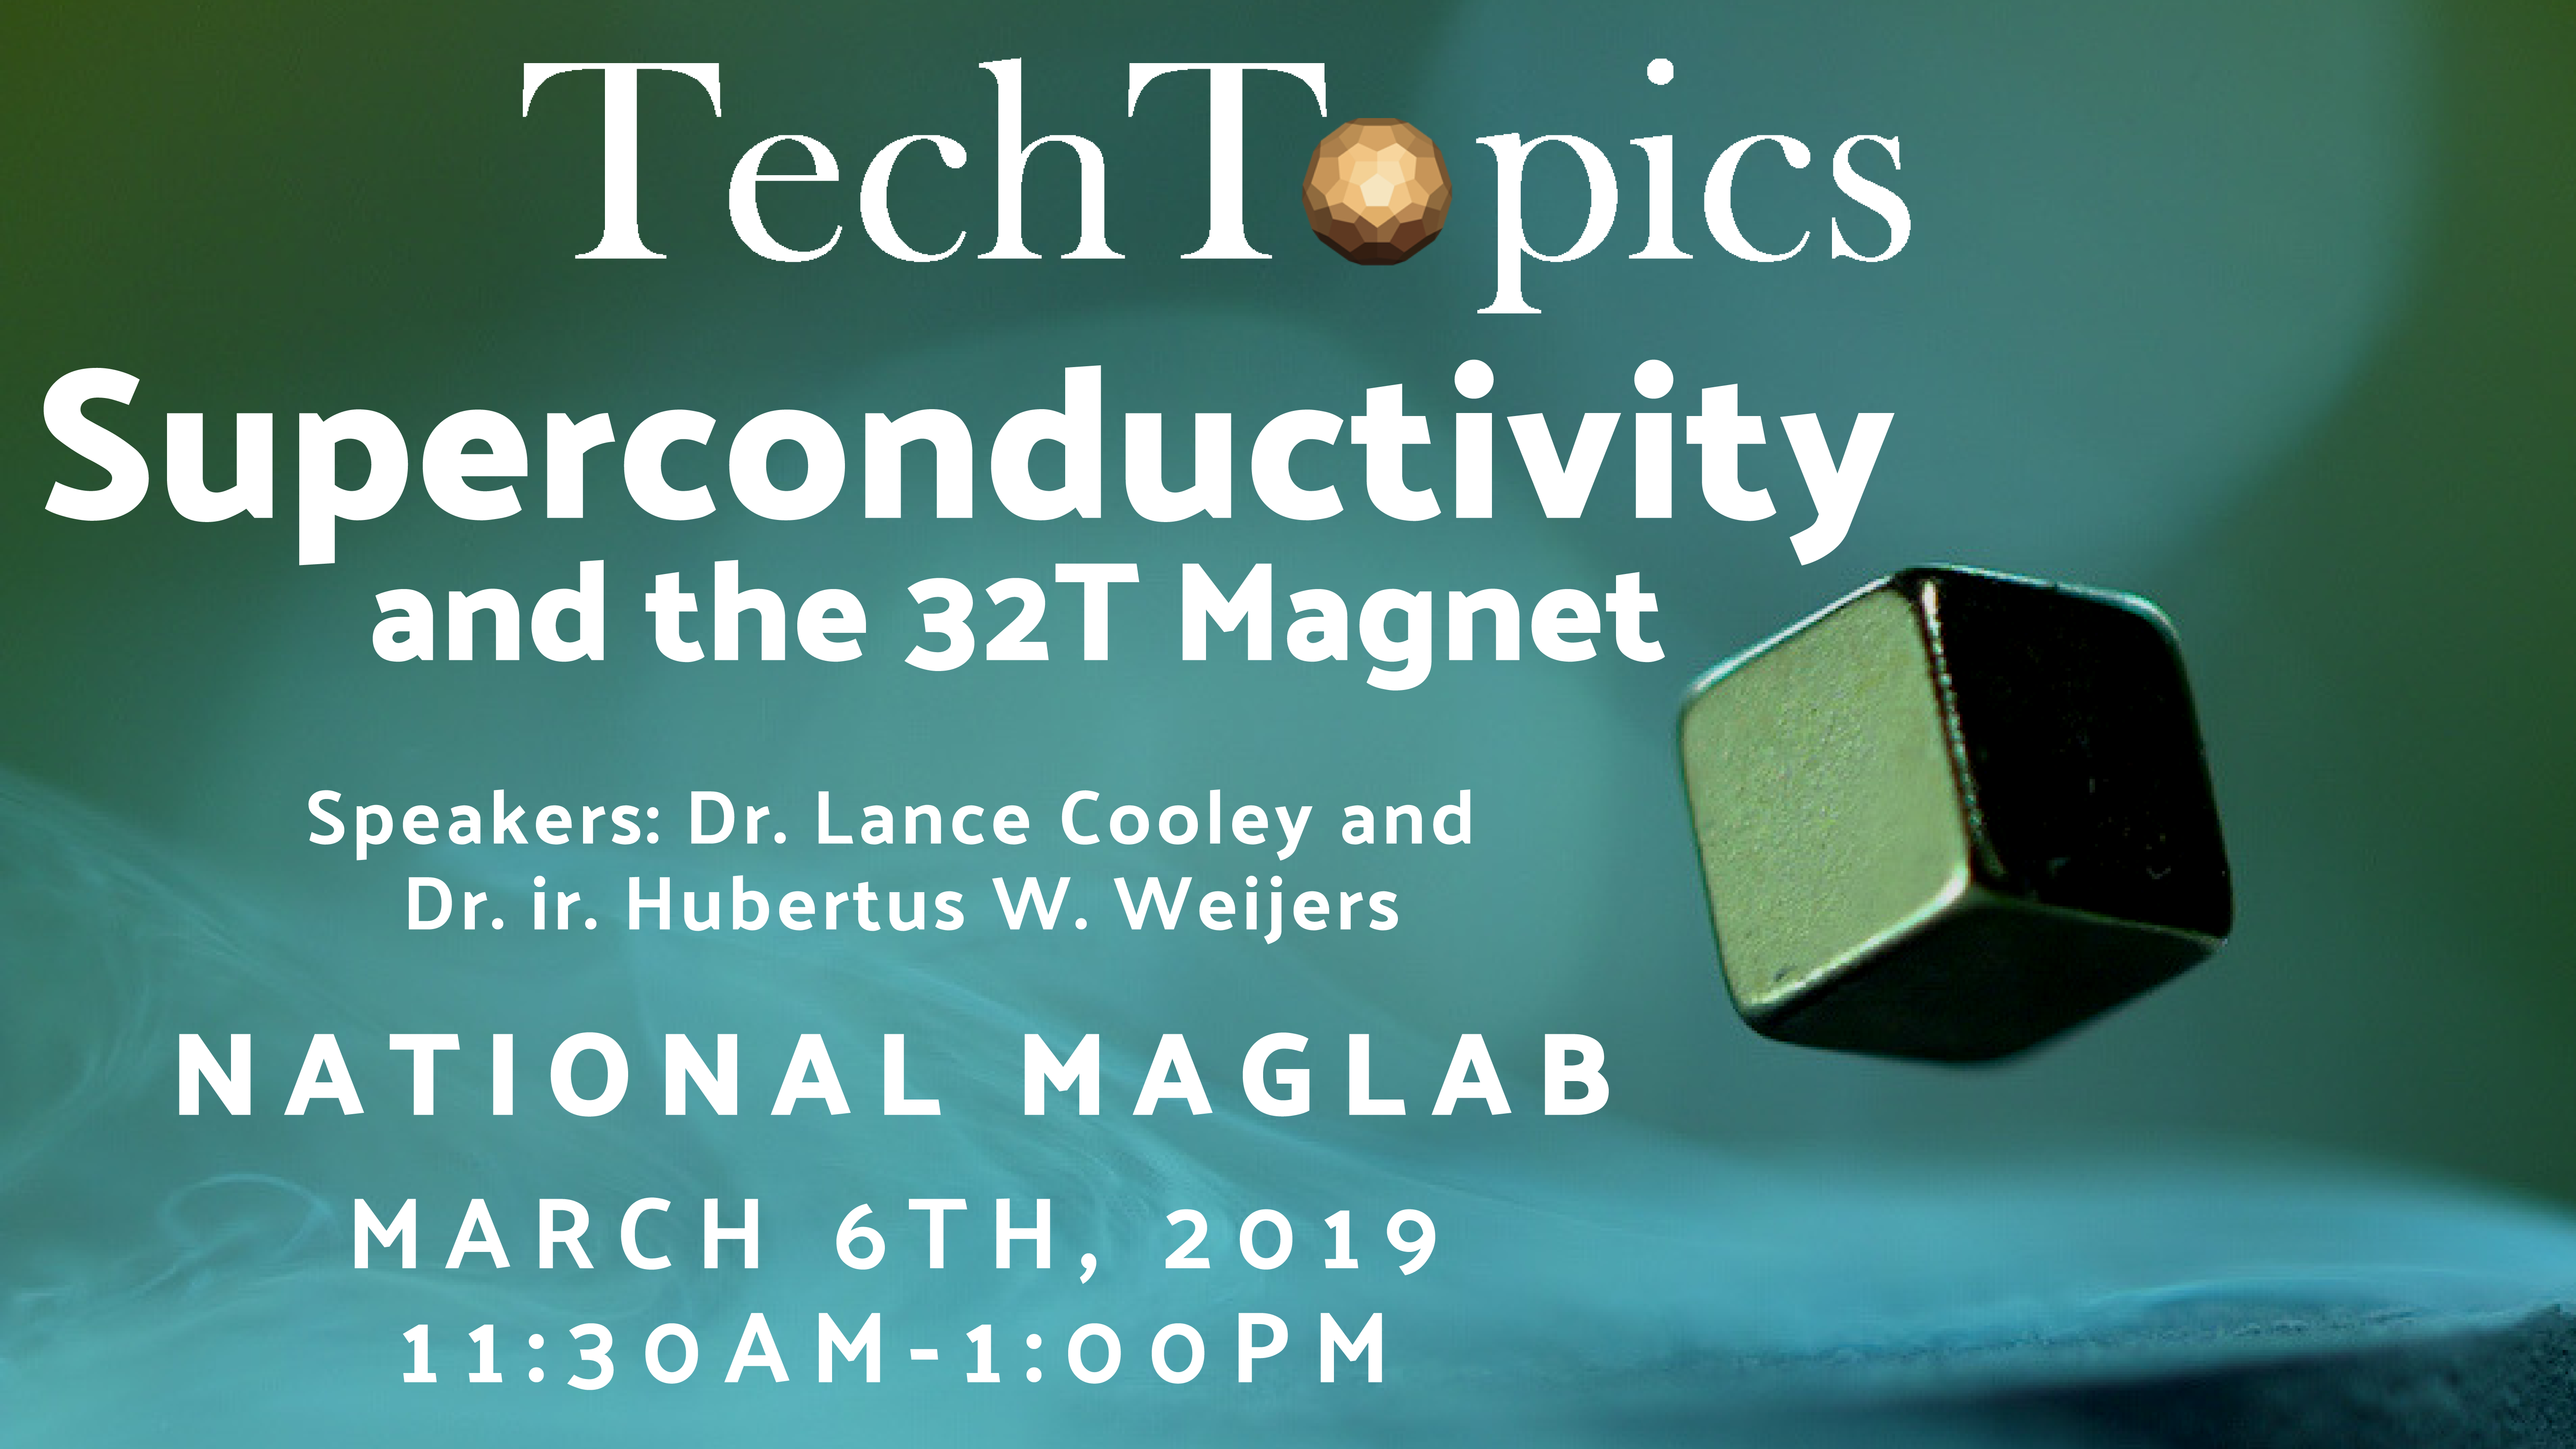 March 2019 Techtopics event will be on superconductivity